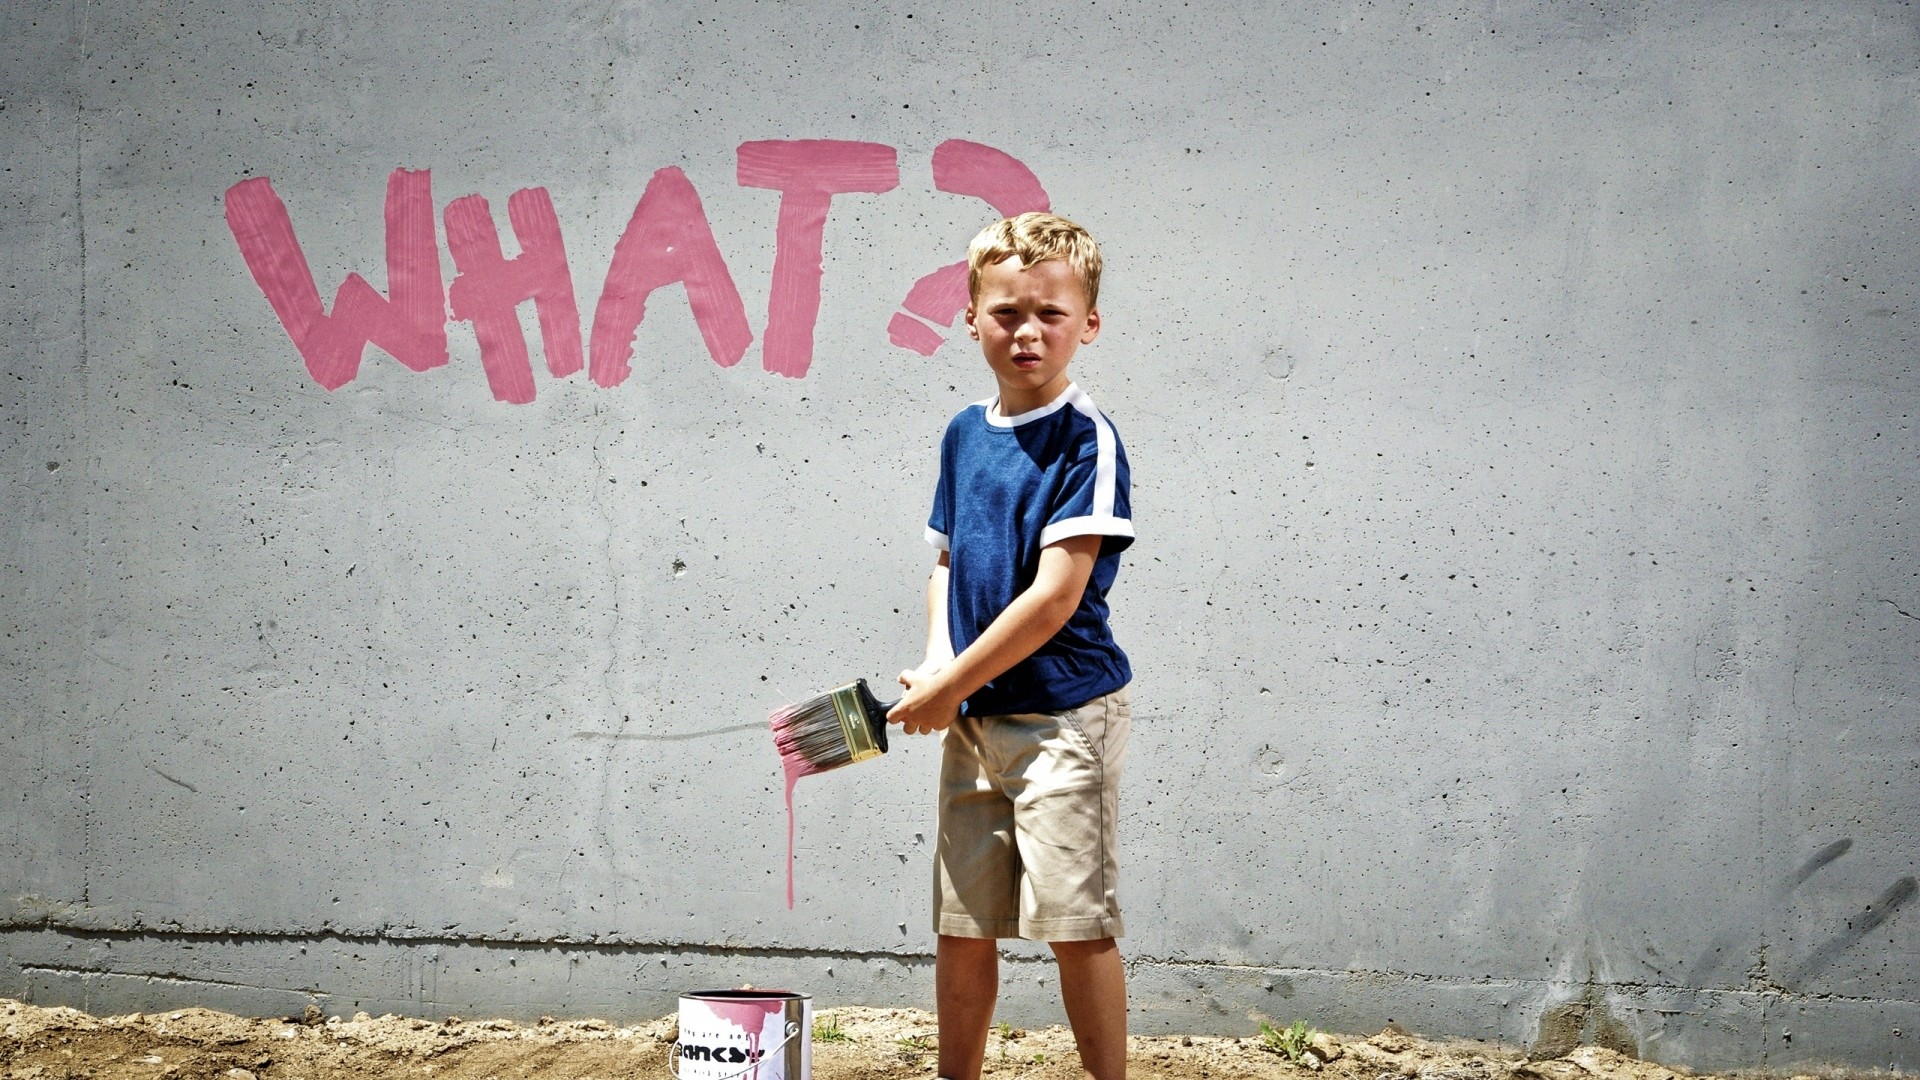 Wallpaper baby, boy, brush, paint, wall, sign, issue